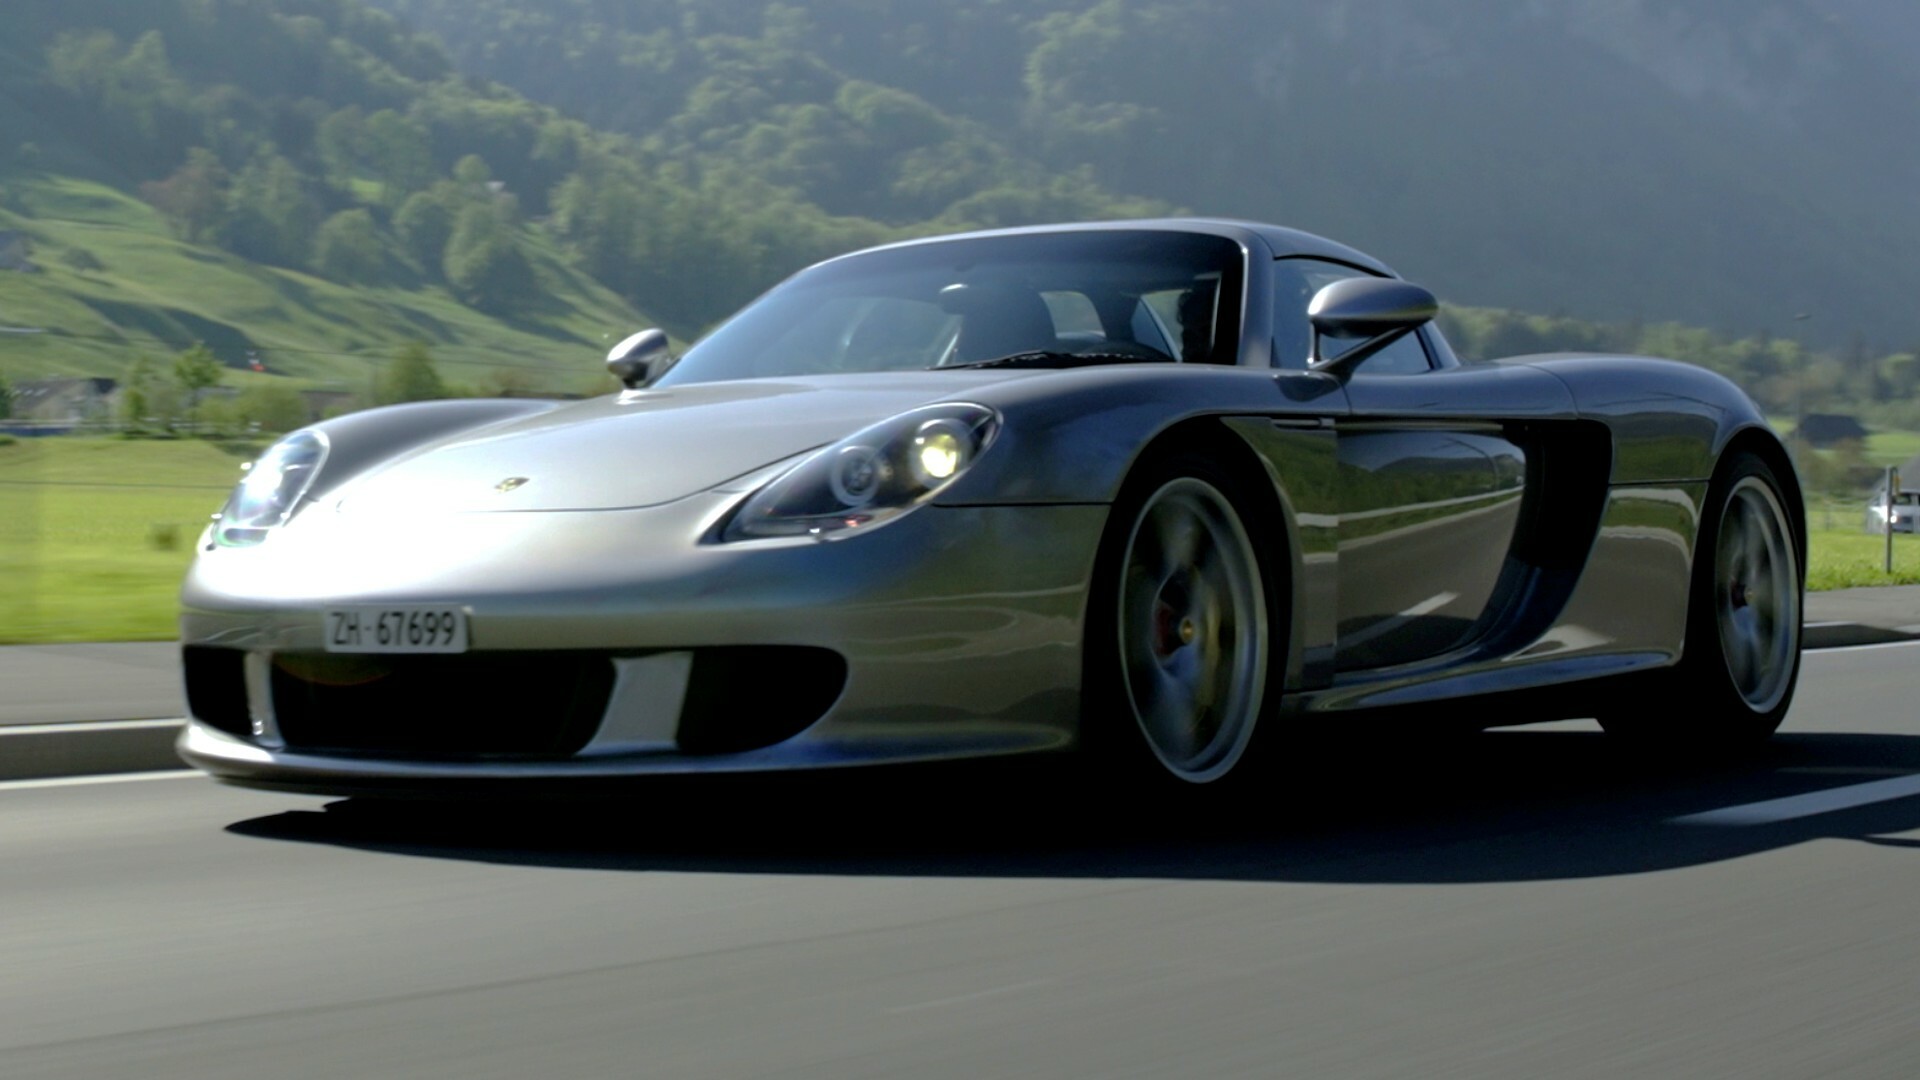 Porsche Carrera GT Gets A Comfort Upgrade With $16k KW Coilovers And Lift  Kit | Carscoops